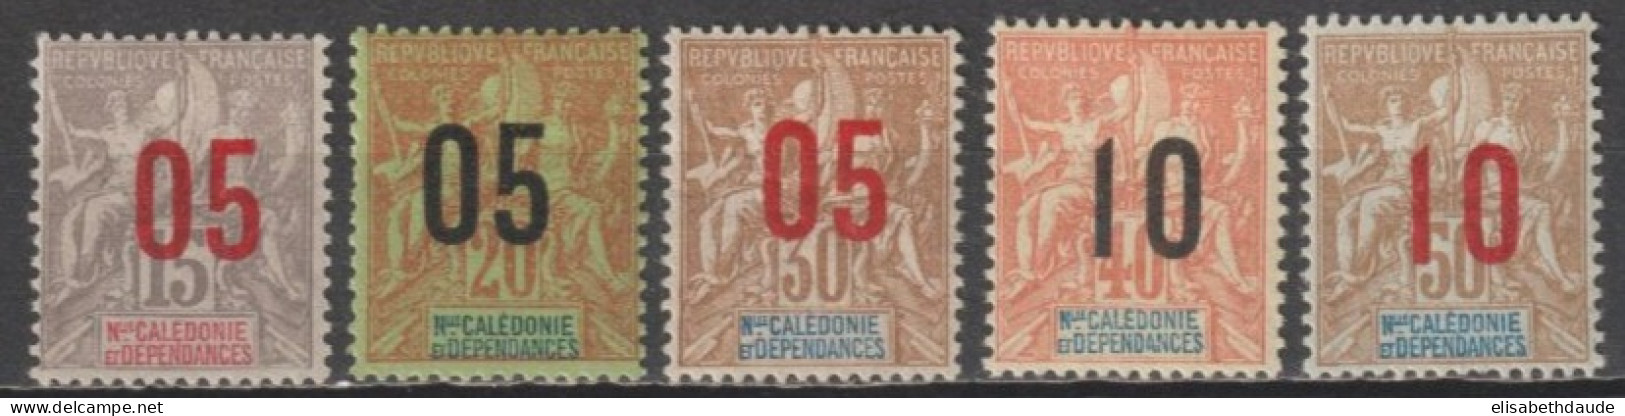 NOUVELLE CALEDONIE - 1912 - SERIE COMPLETE YVERT N°105/109 * MLH - COTE = 12.5 EUR - Nuovi